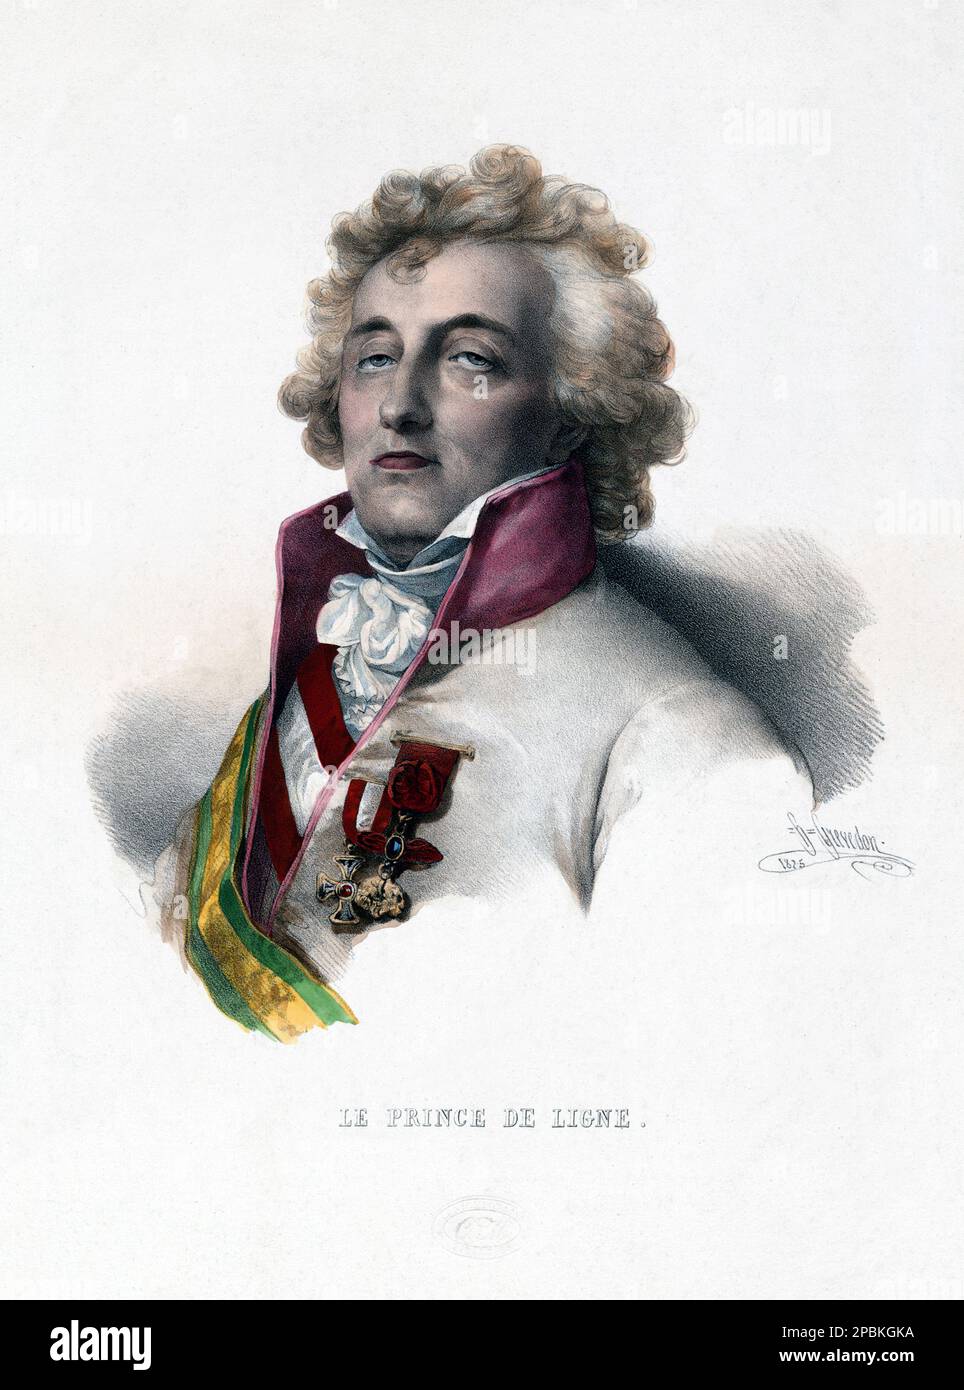 1825 , FRANCE :  The Prince Charles Joseph DE LIGNE ( 1735 - 1814 ). Portrait engraved by H. Grevedon .  Prince de Ligne pioneer of fly, who was on board the balloon 'La Fresselle,' Jan. 19, 1784, with Joseph Montgolfier and Pilâtre de Rozier . - FRANCE - FRANCIA - illustration - incisione - PORTRAIT - RITRATTO - NOBILITY - NOBILI - Nobiltà - collar - colletto - jabots - medals - medaglie - medaglia - PIONIERE DEL VOLO UMANO - Balloon - MONGOLFIERA - MONGOLFIERE - AERONAUTICA - AIRCRAFT -  Balloon ascensions - ASCENSIONISTA - ASCENSIONI IN PALLONE - ASCENSIONE  ----  Archivio GBB Stock Photo